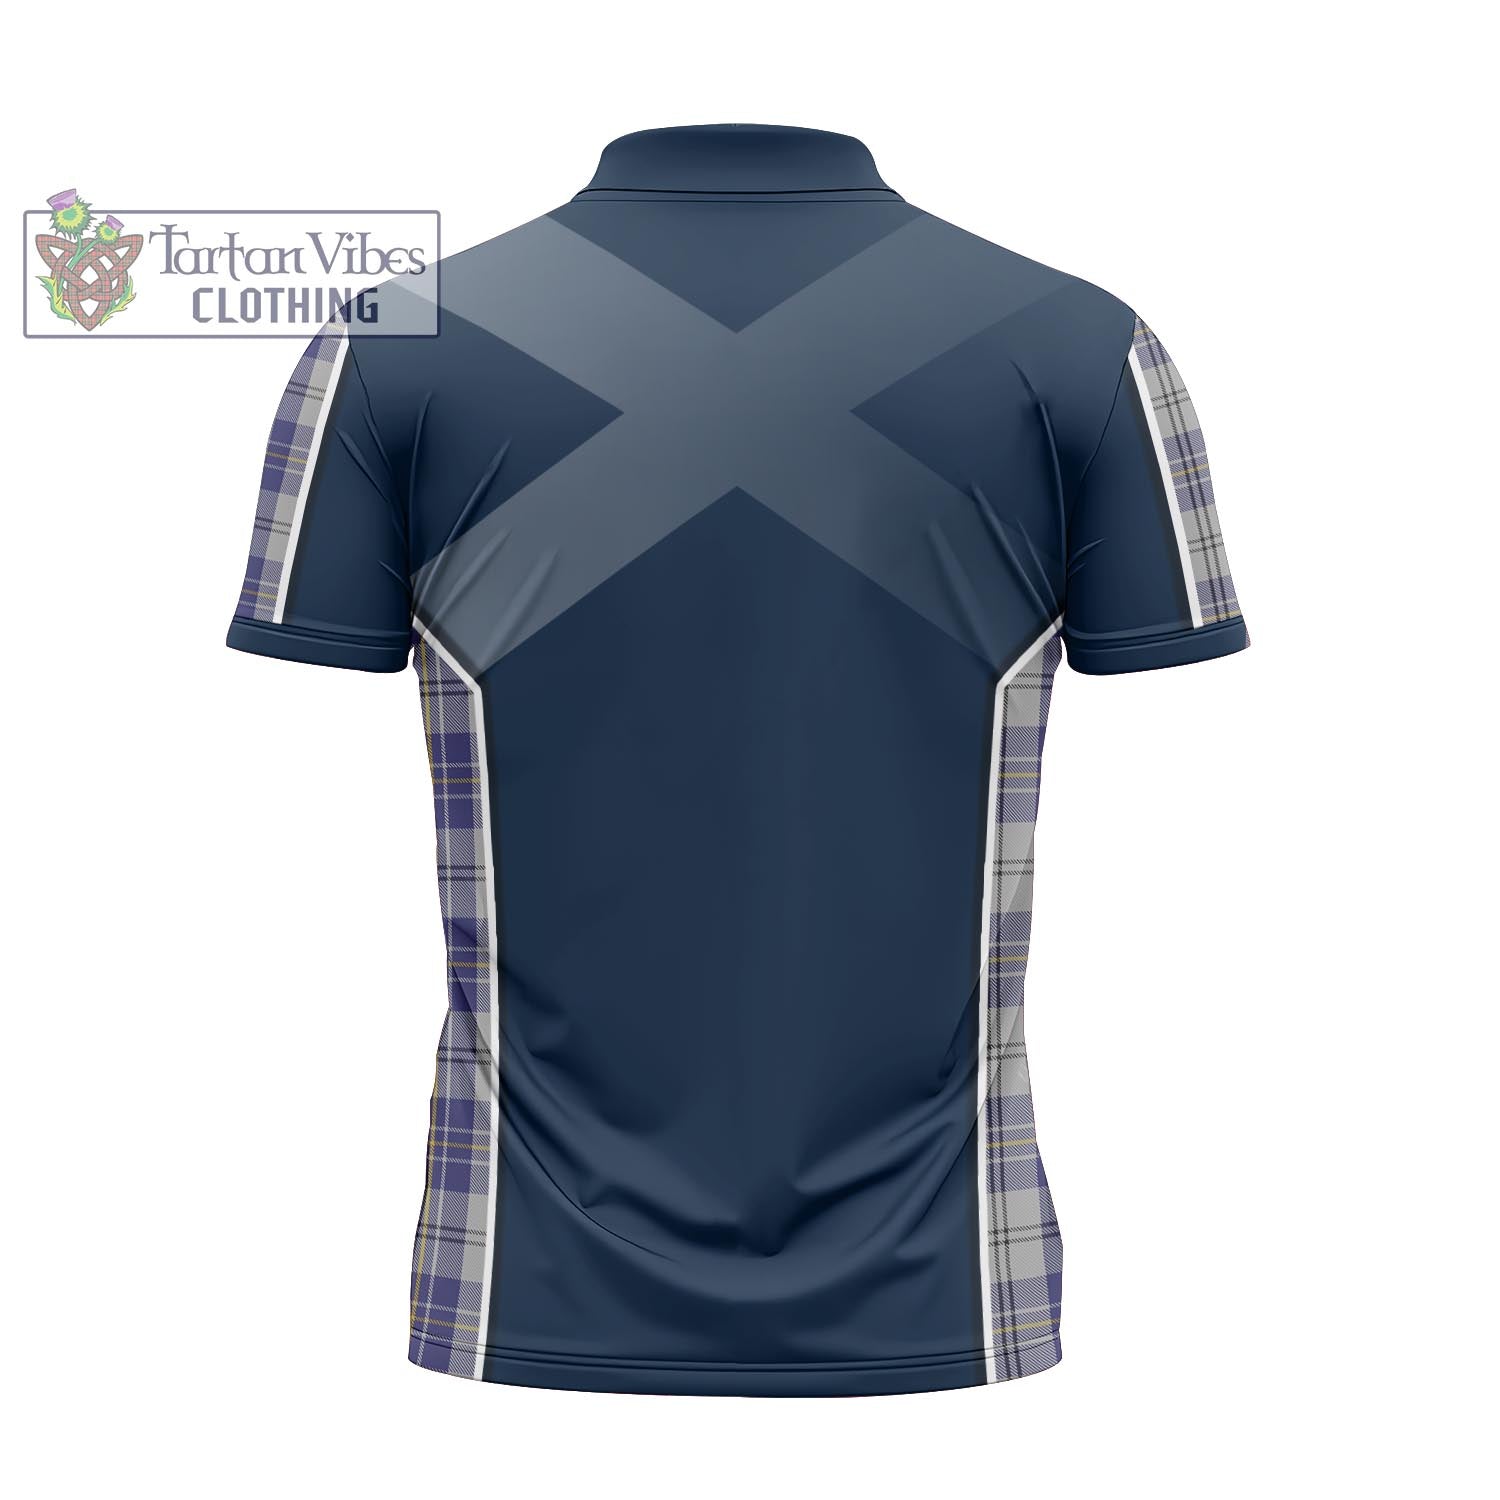 Tartan Vibes Clothing MacPherson Dress Blue Tartan Zipper Polo Shirt with Family Crest and Scottish Thistle Vibes Sport Style